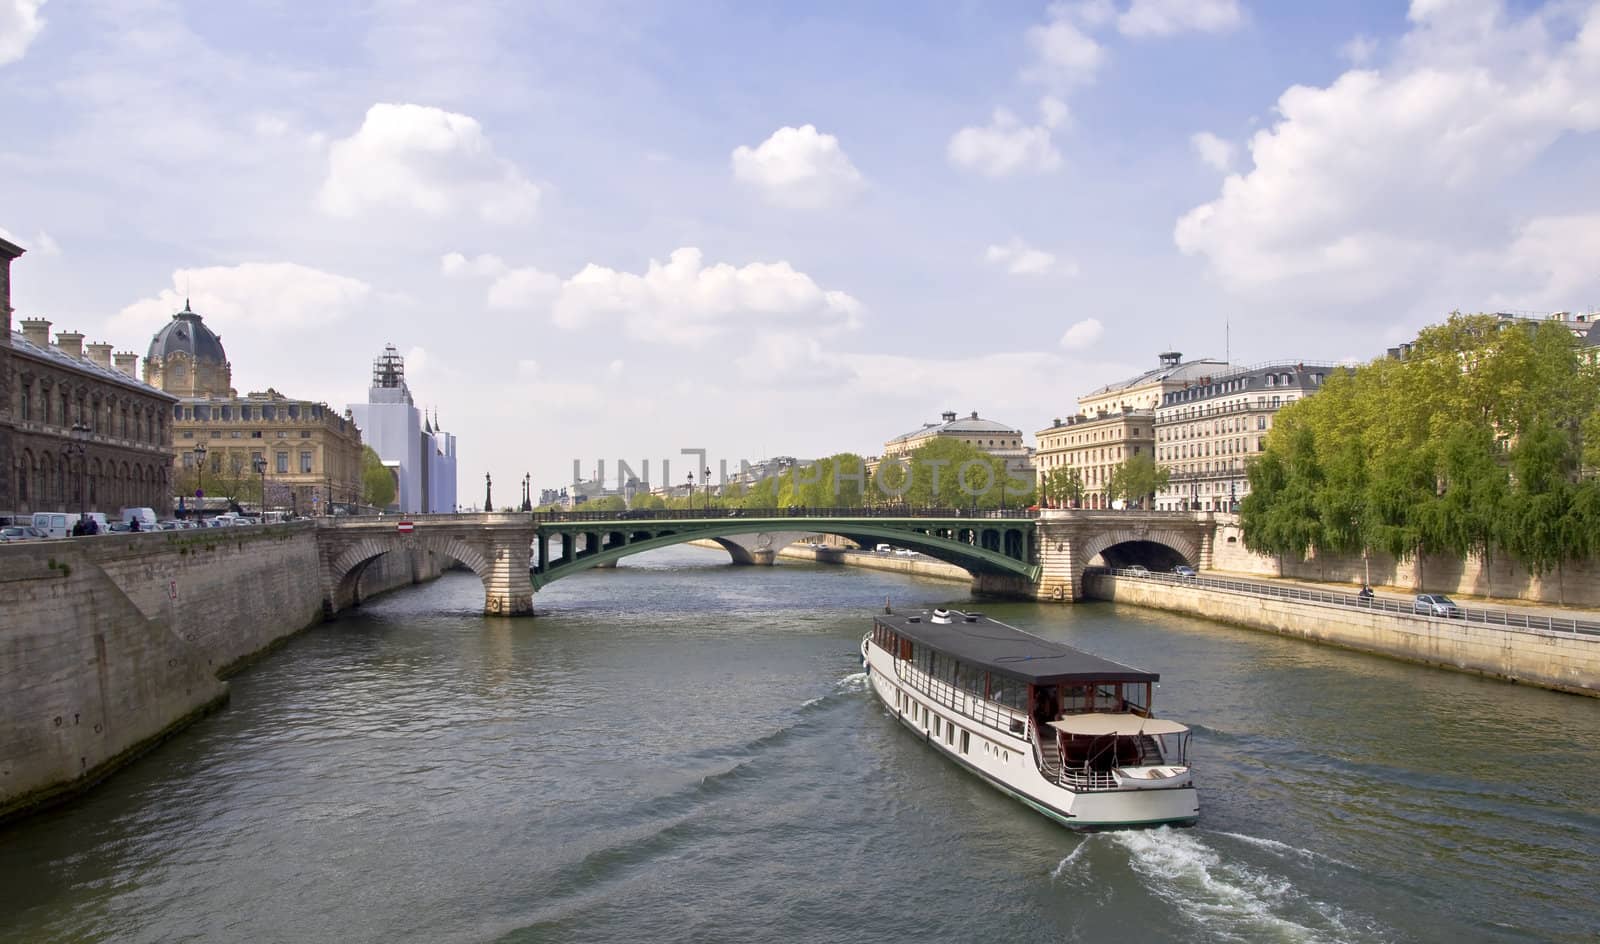 Passenger ship boat sails on the river Seine. View from the Quay. Urban scene. Paris